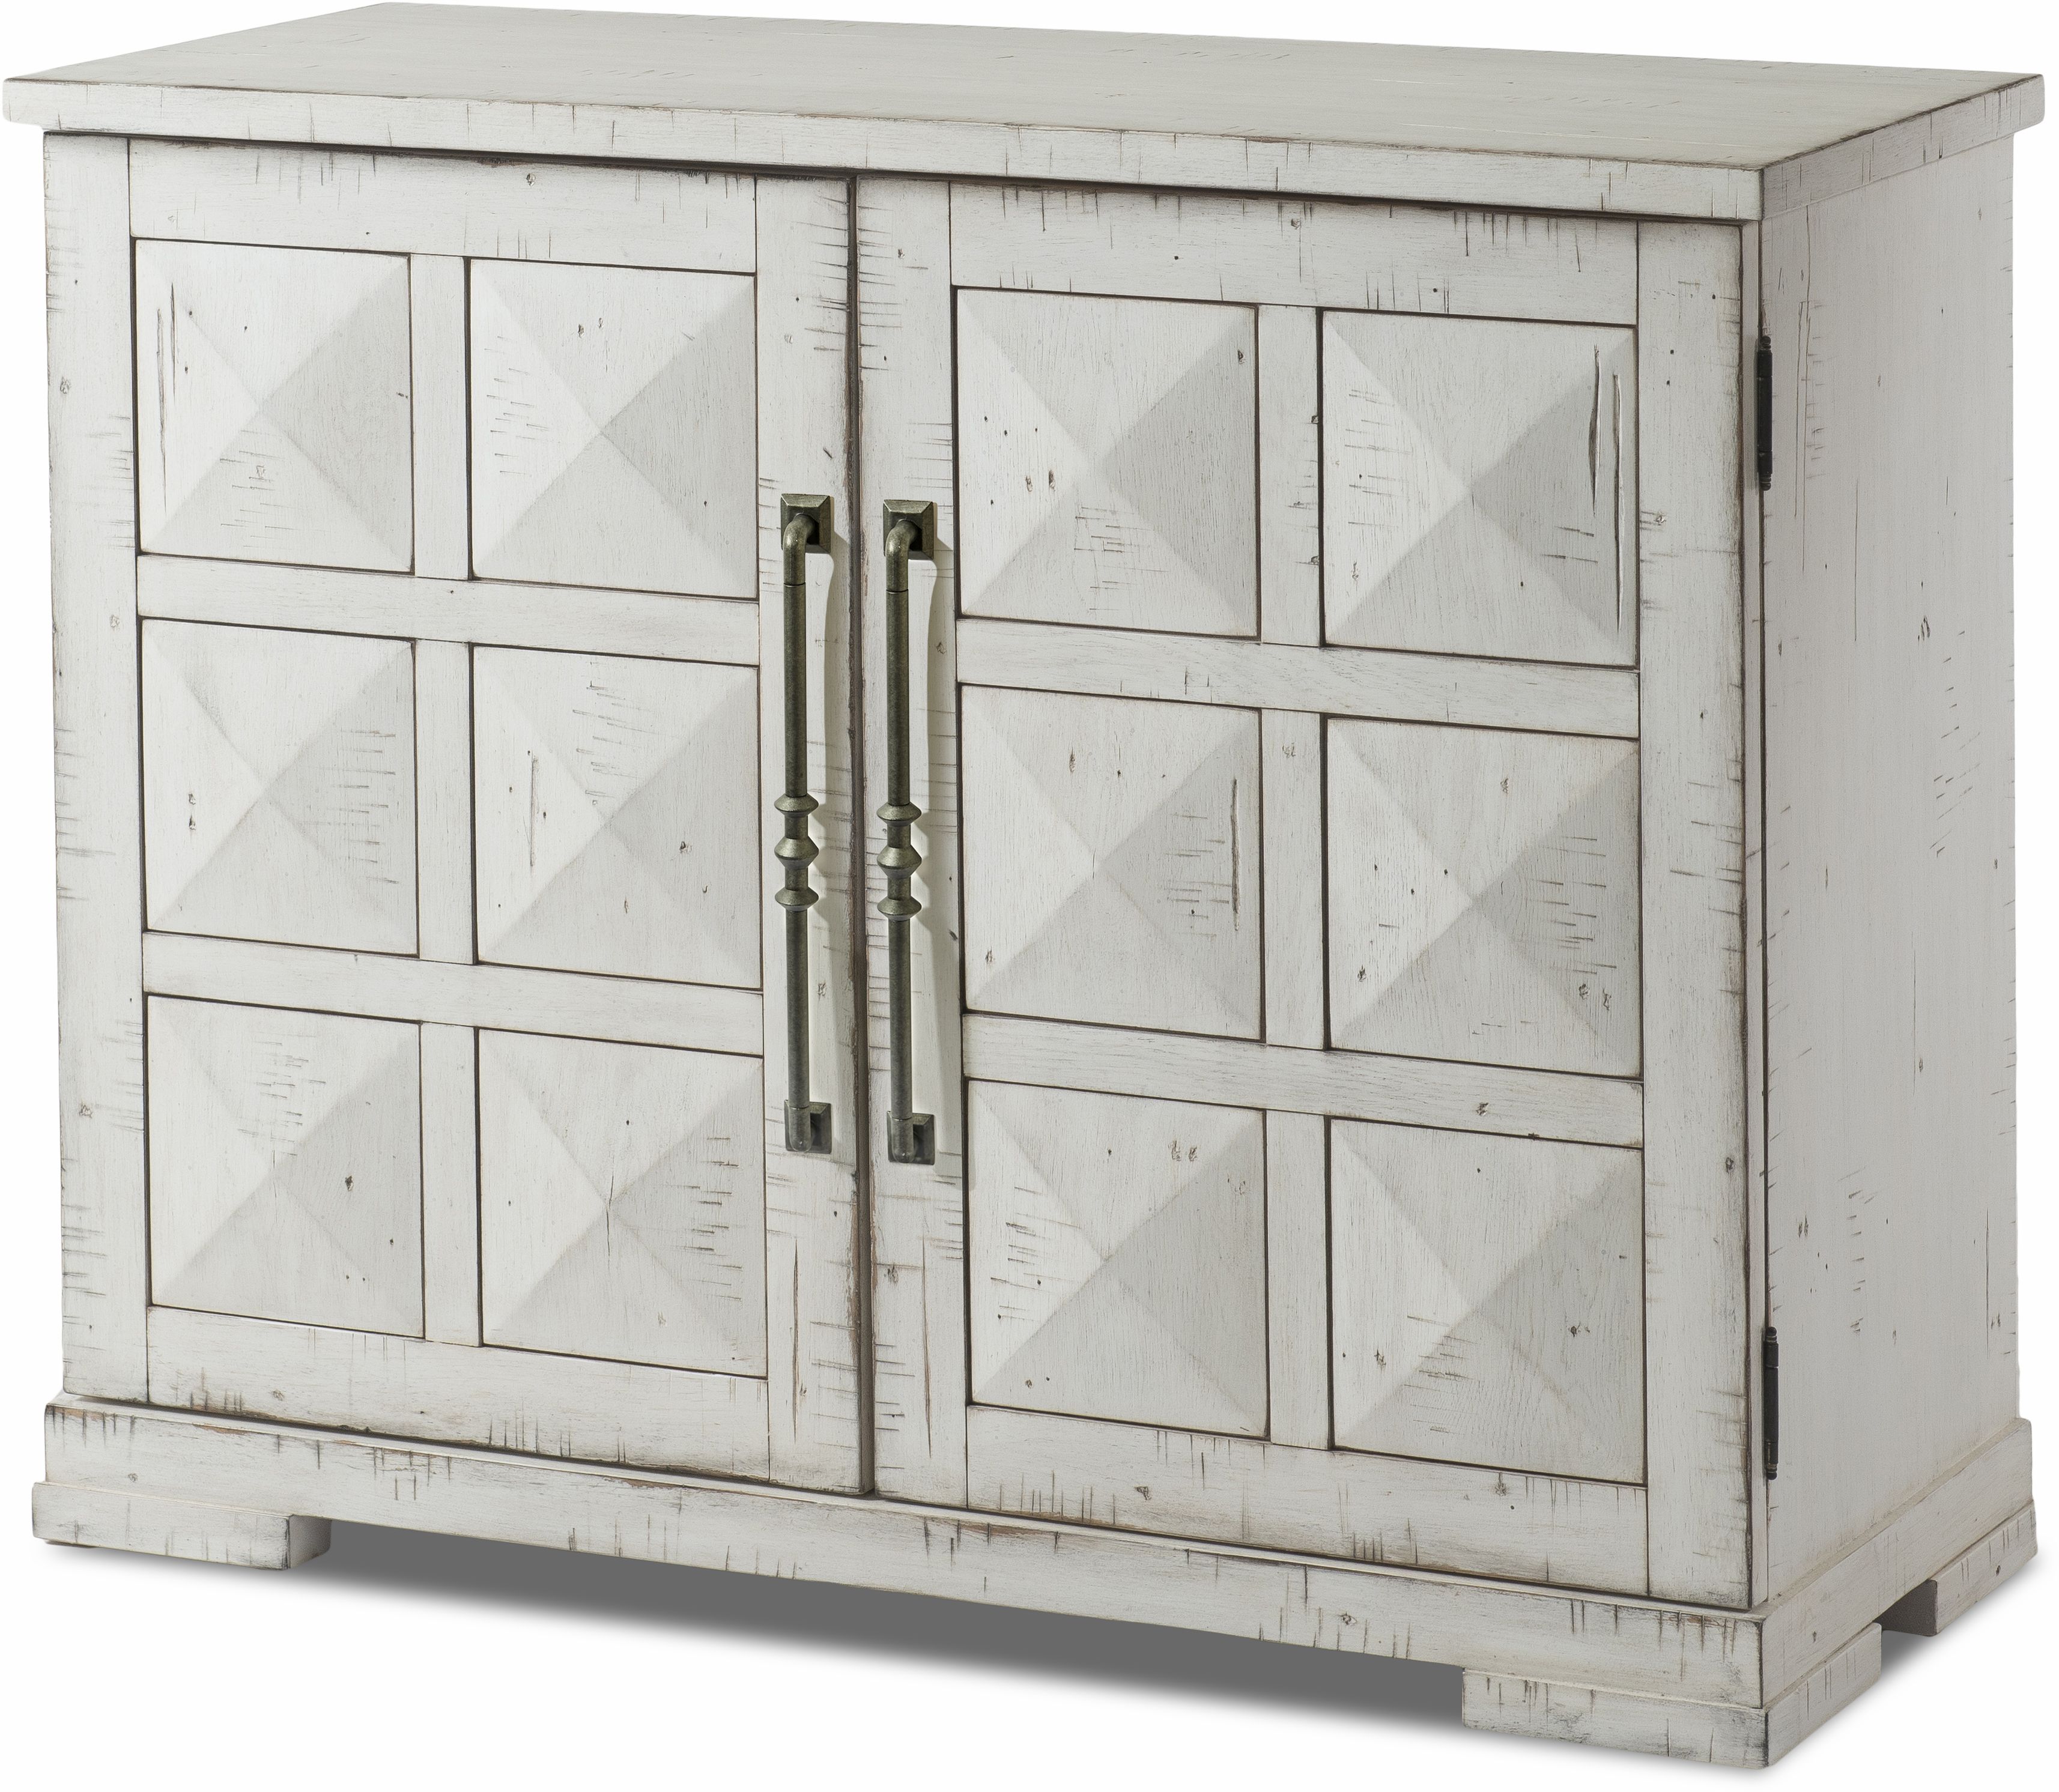 Klaussner® Trisha Yearwood Coming Home Harmony Accent Chest